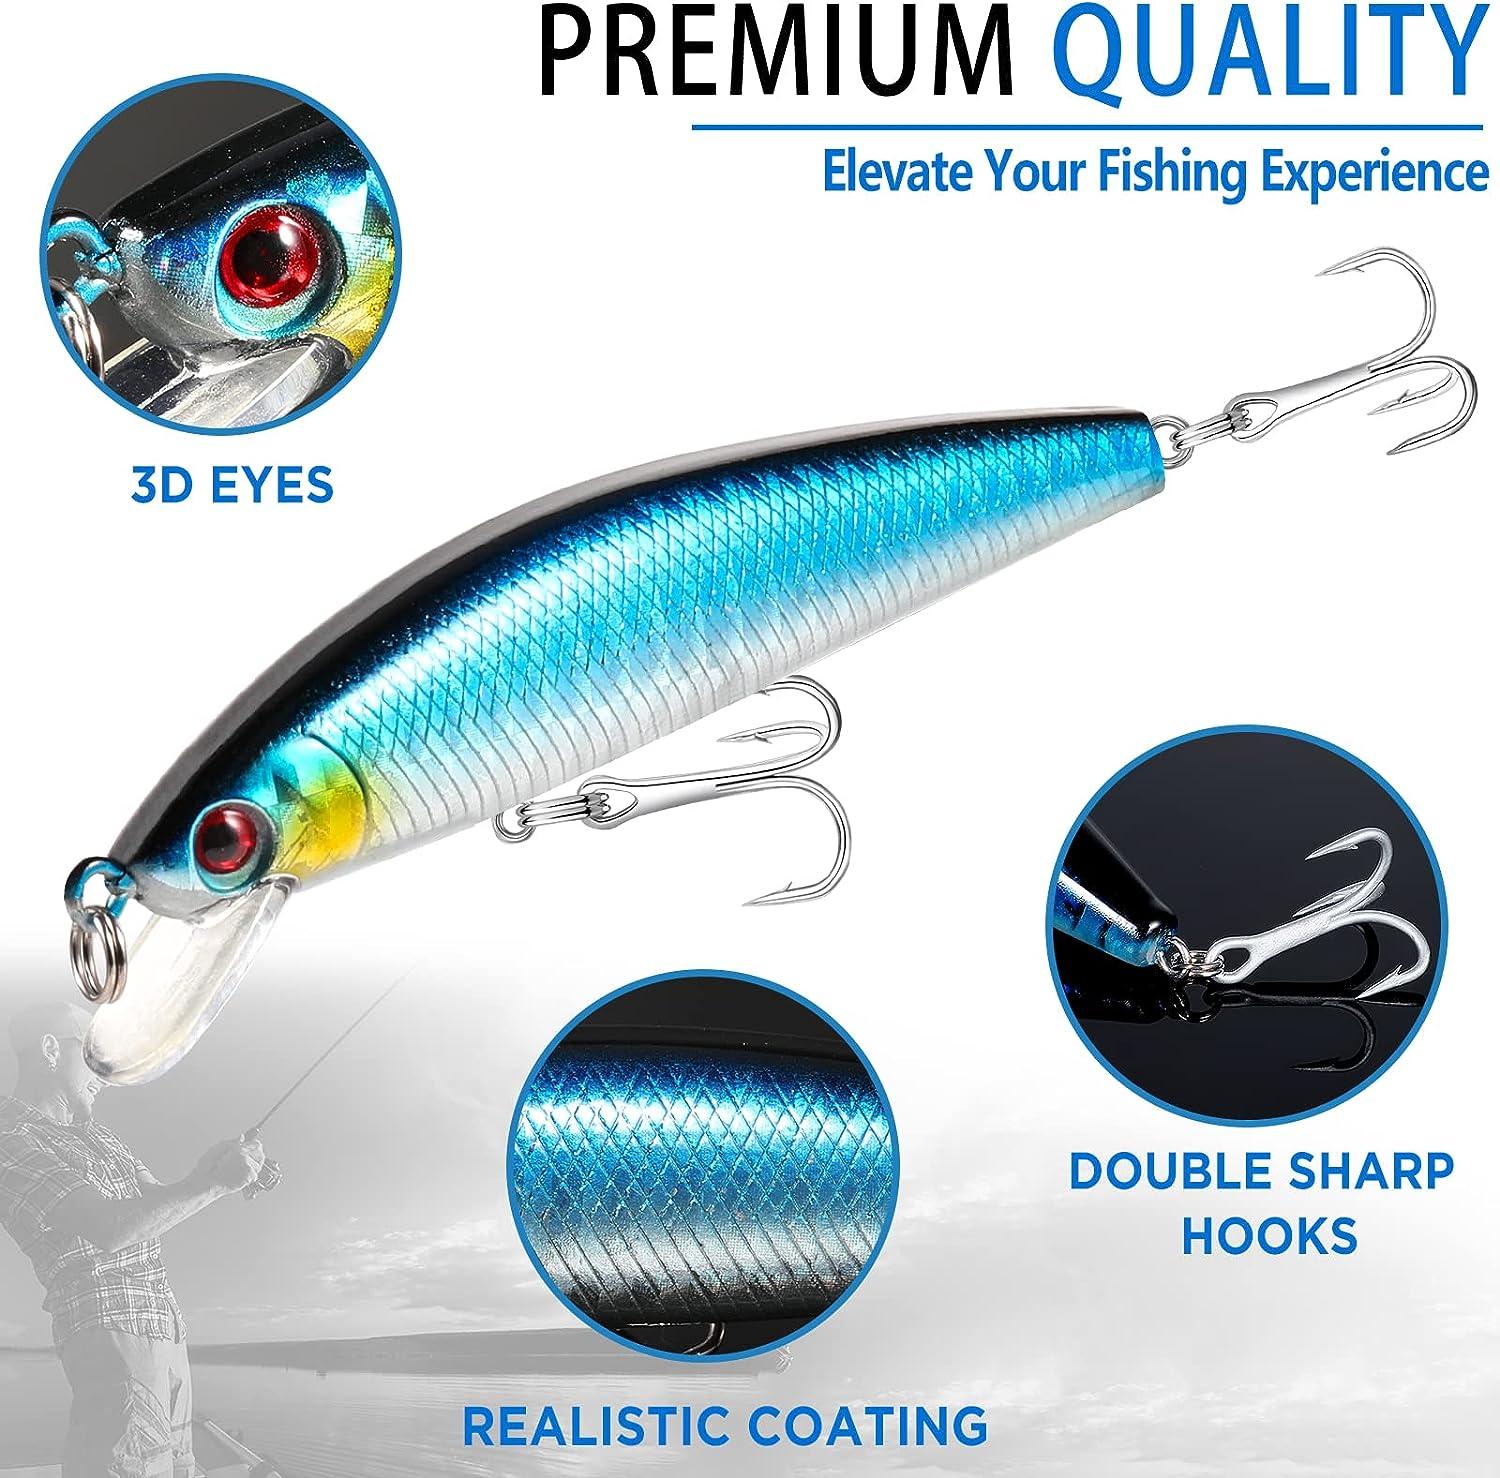 lure coat, lure coat Suppliers and Manufacturers at